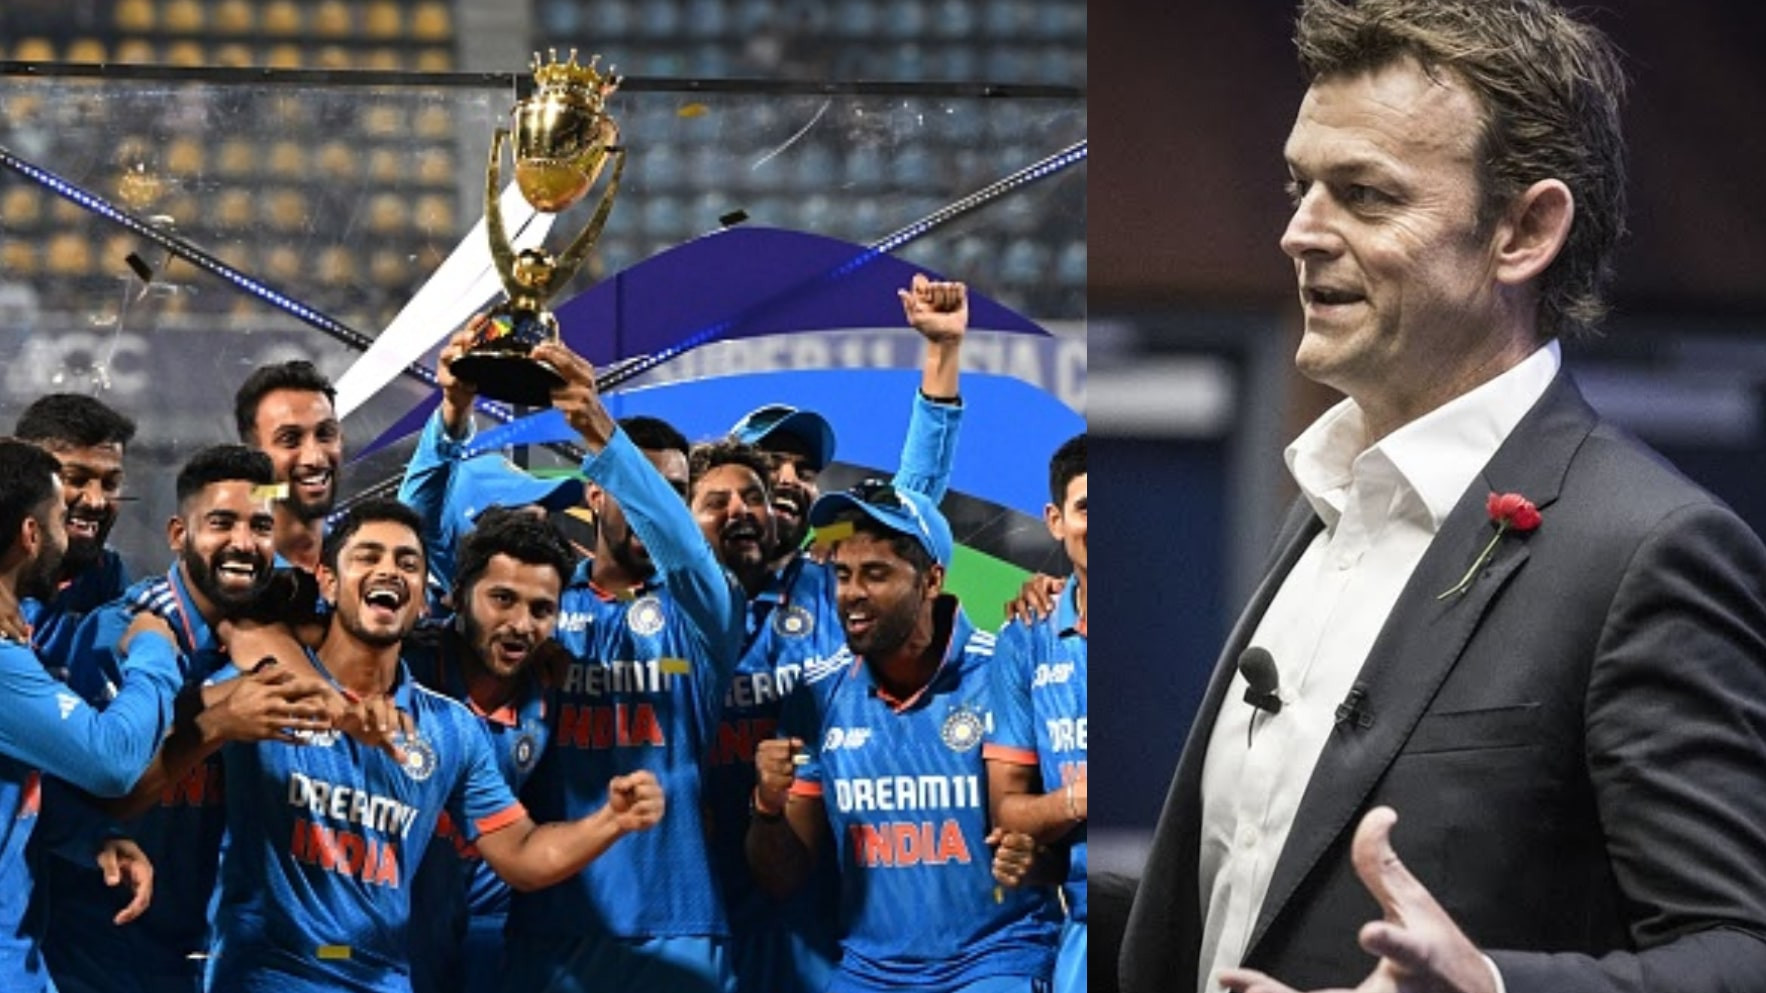 CWC 2023: Adam Gilchrist names India as one of his four semi-finalist teams for the World Cup